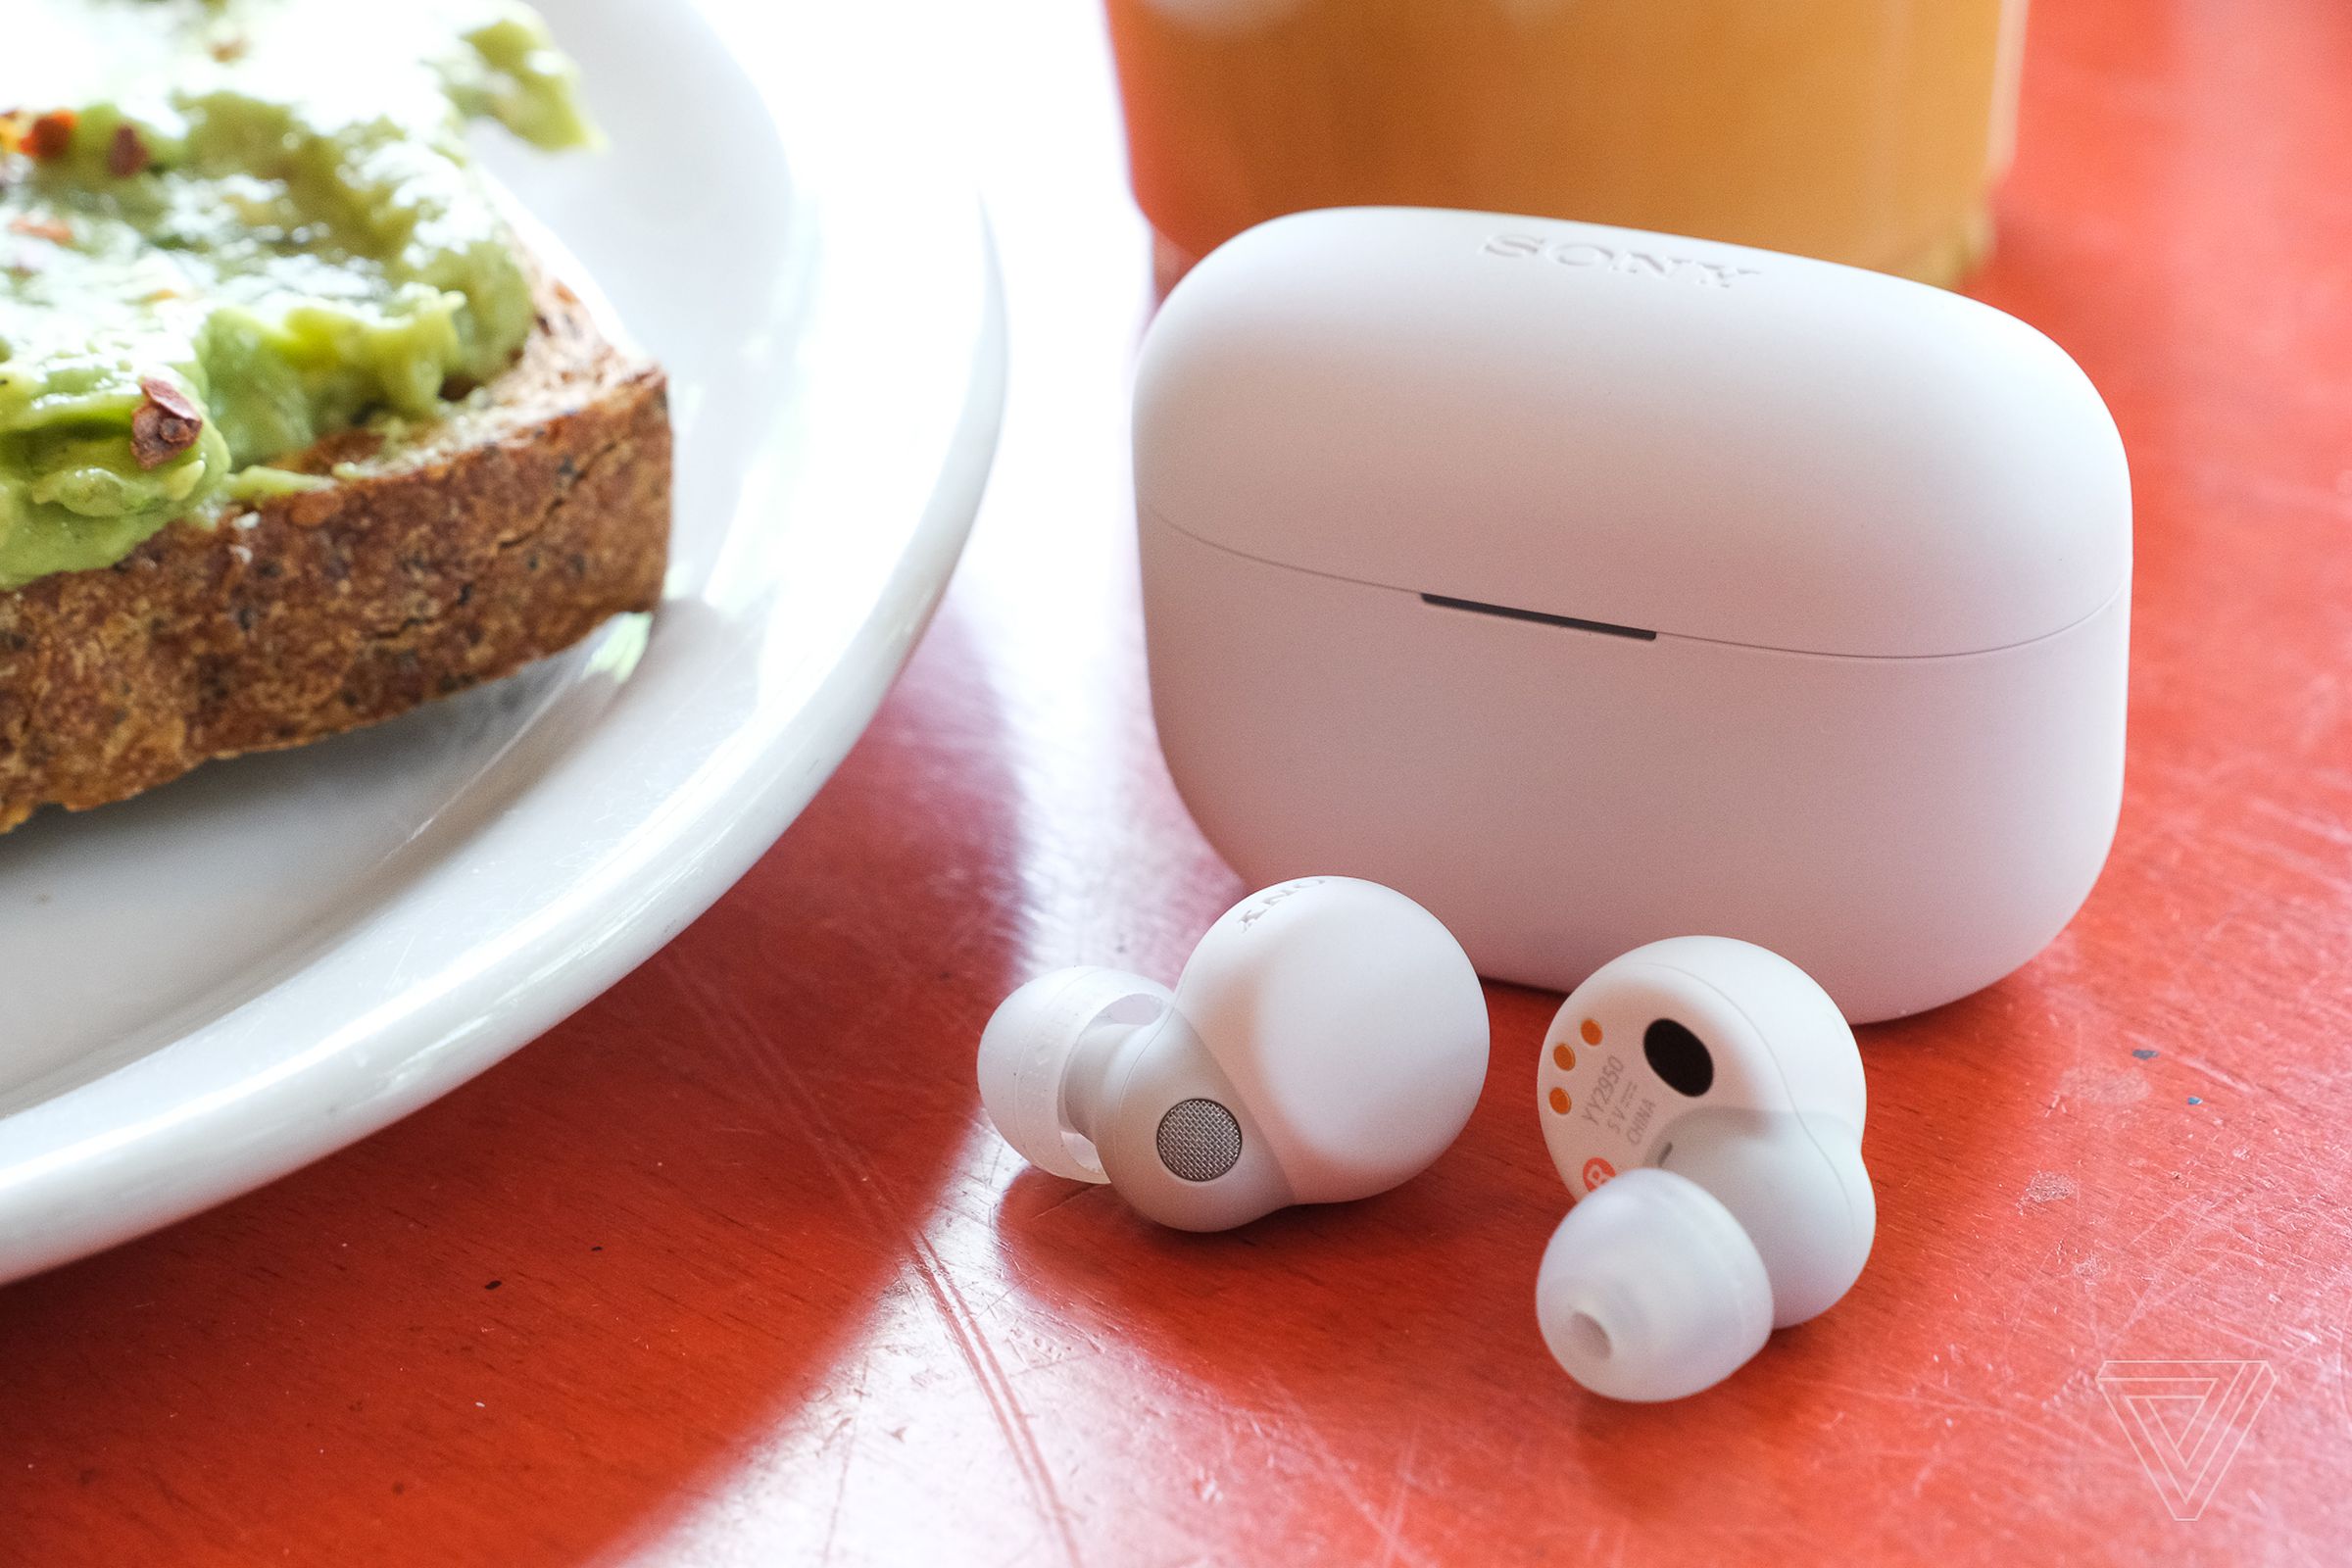 The white Sony LinkBuds S earbuds resting on a table outside their case, beside a plate of food.